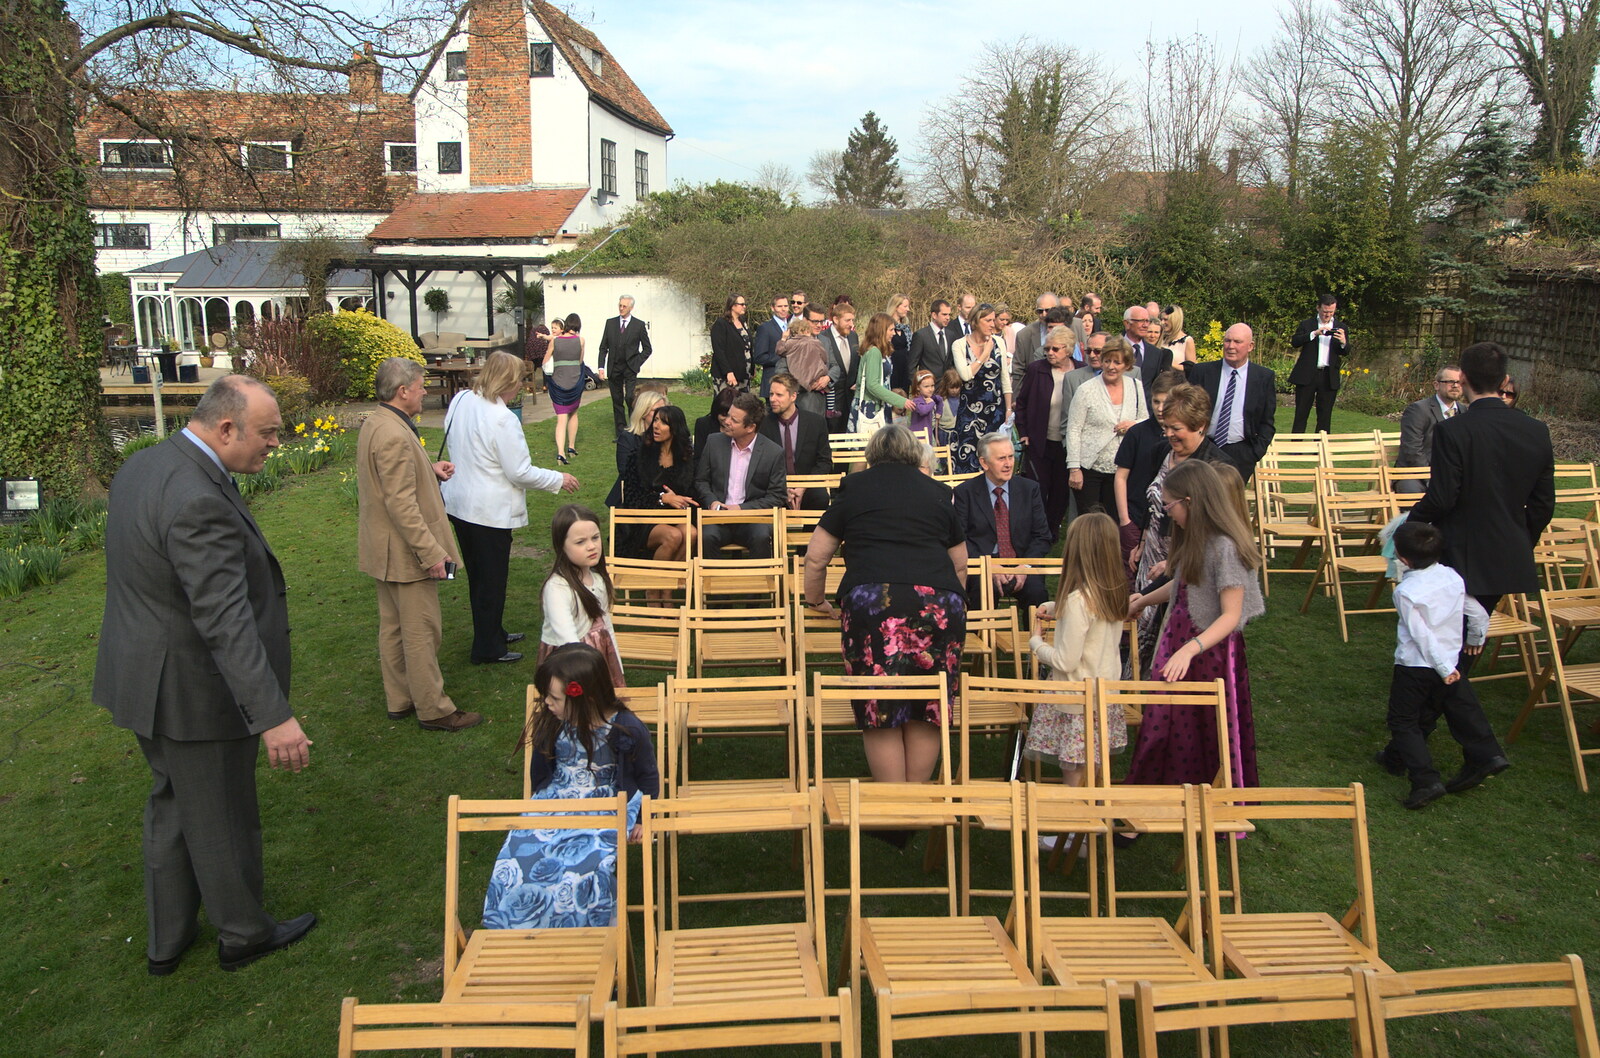 Seating arrangements from John and Caroline's Wedding, Sheene Mill, Melbourne, Cambridgeshire - 8th March 2014